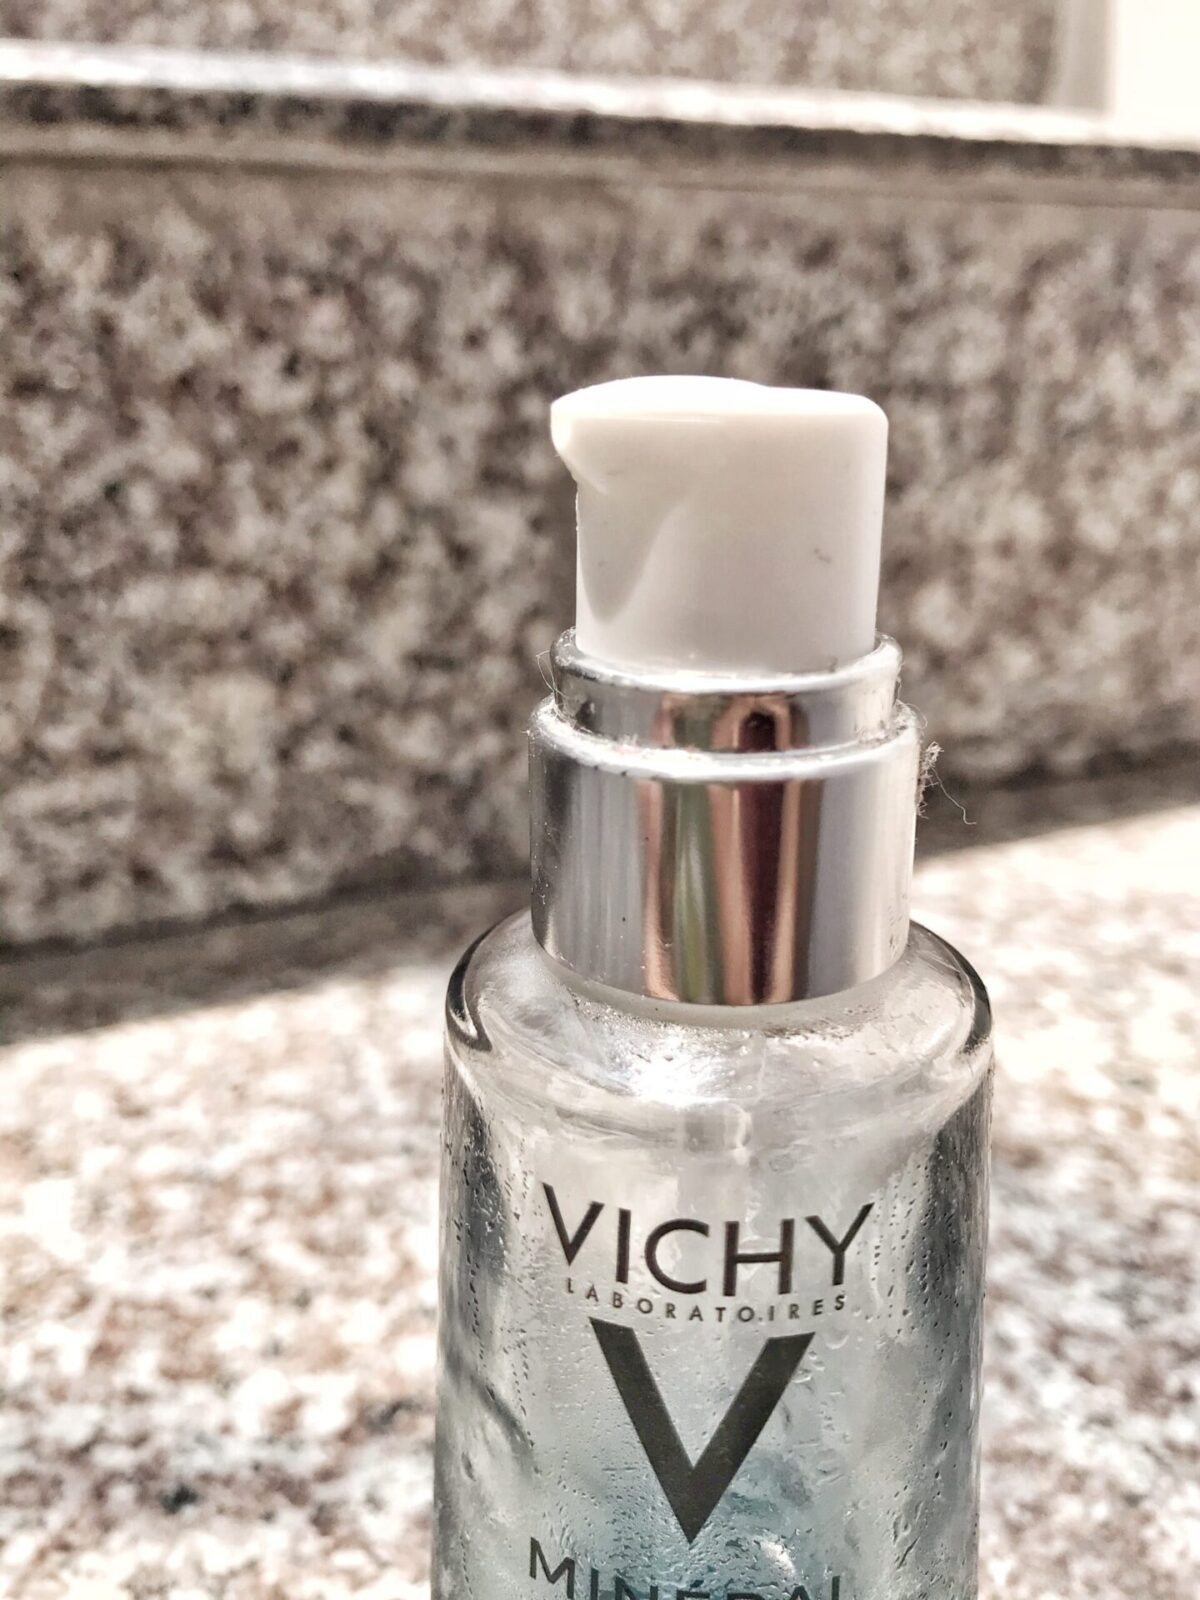 REVIEW DƯỠNG CHẤT VICHY MINERAL 89 BOOSTER 5